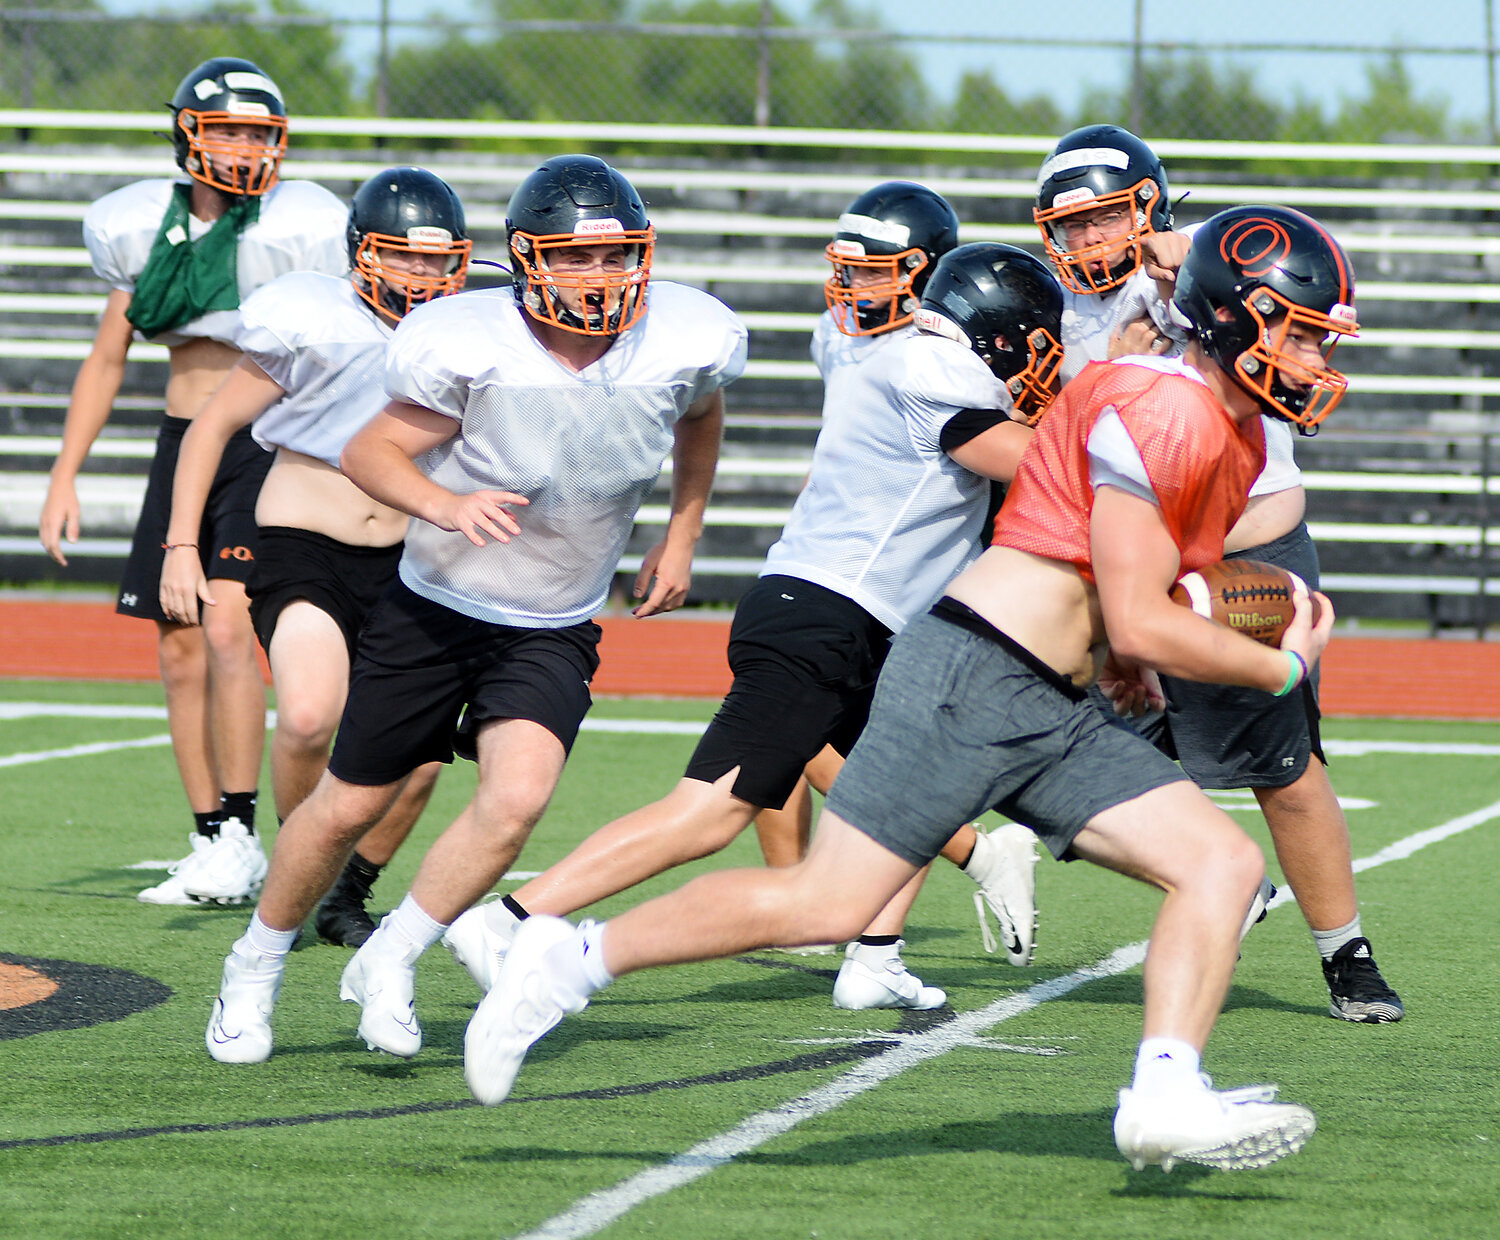 Blake Elliott (far right) locates a hole in the defense during a recent practice session last week for Owensville Dutchmen football at Dutchmen Field. Now a senior, Elliott will lead the Dutchmen beginning this Friday by hosting their first-ever preseason jamboree beginning at 6 p.m. Teams competing along with the host orange and black include Linn’s Wildcats, Fulton’s Hornets, Hermann’s Bearcats, Montgomery County’s Wildcats and Russellville’s Indians. First-year Dutchmen head football coach Dustin Howard will make his head-coaching debut on Friday, Aug. 25 in a Highway 19 showdown on the road  at Cuba High School against the host Wildcats with a 7 p.m., kickoff. Dutchmen fans will have to wait until Friday, Sept. 8 to see the orange and black at Dutchmen Field in their home opener against Warrenton’s Warriors.